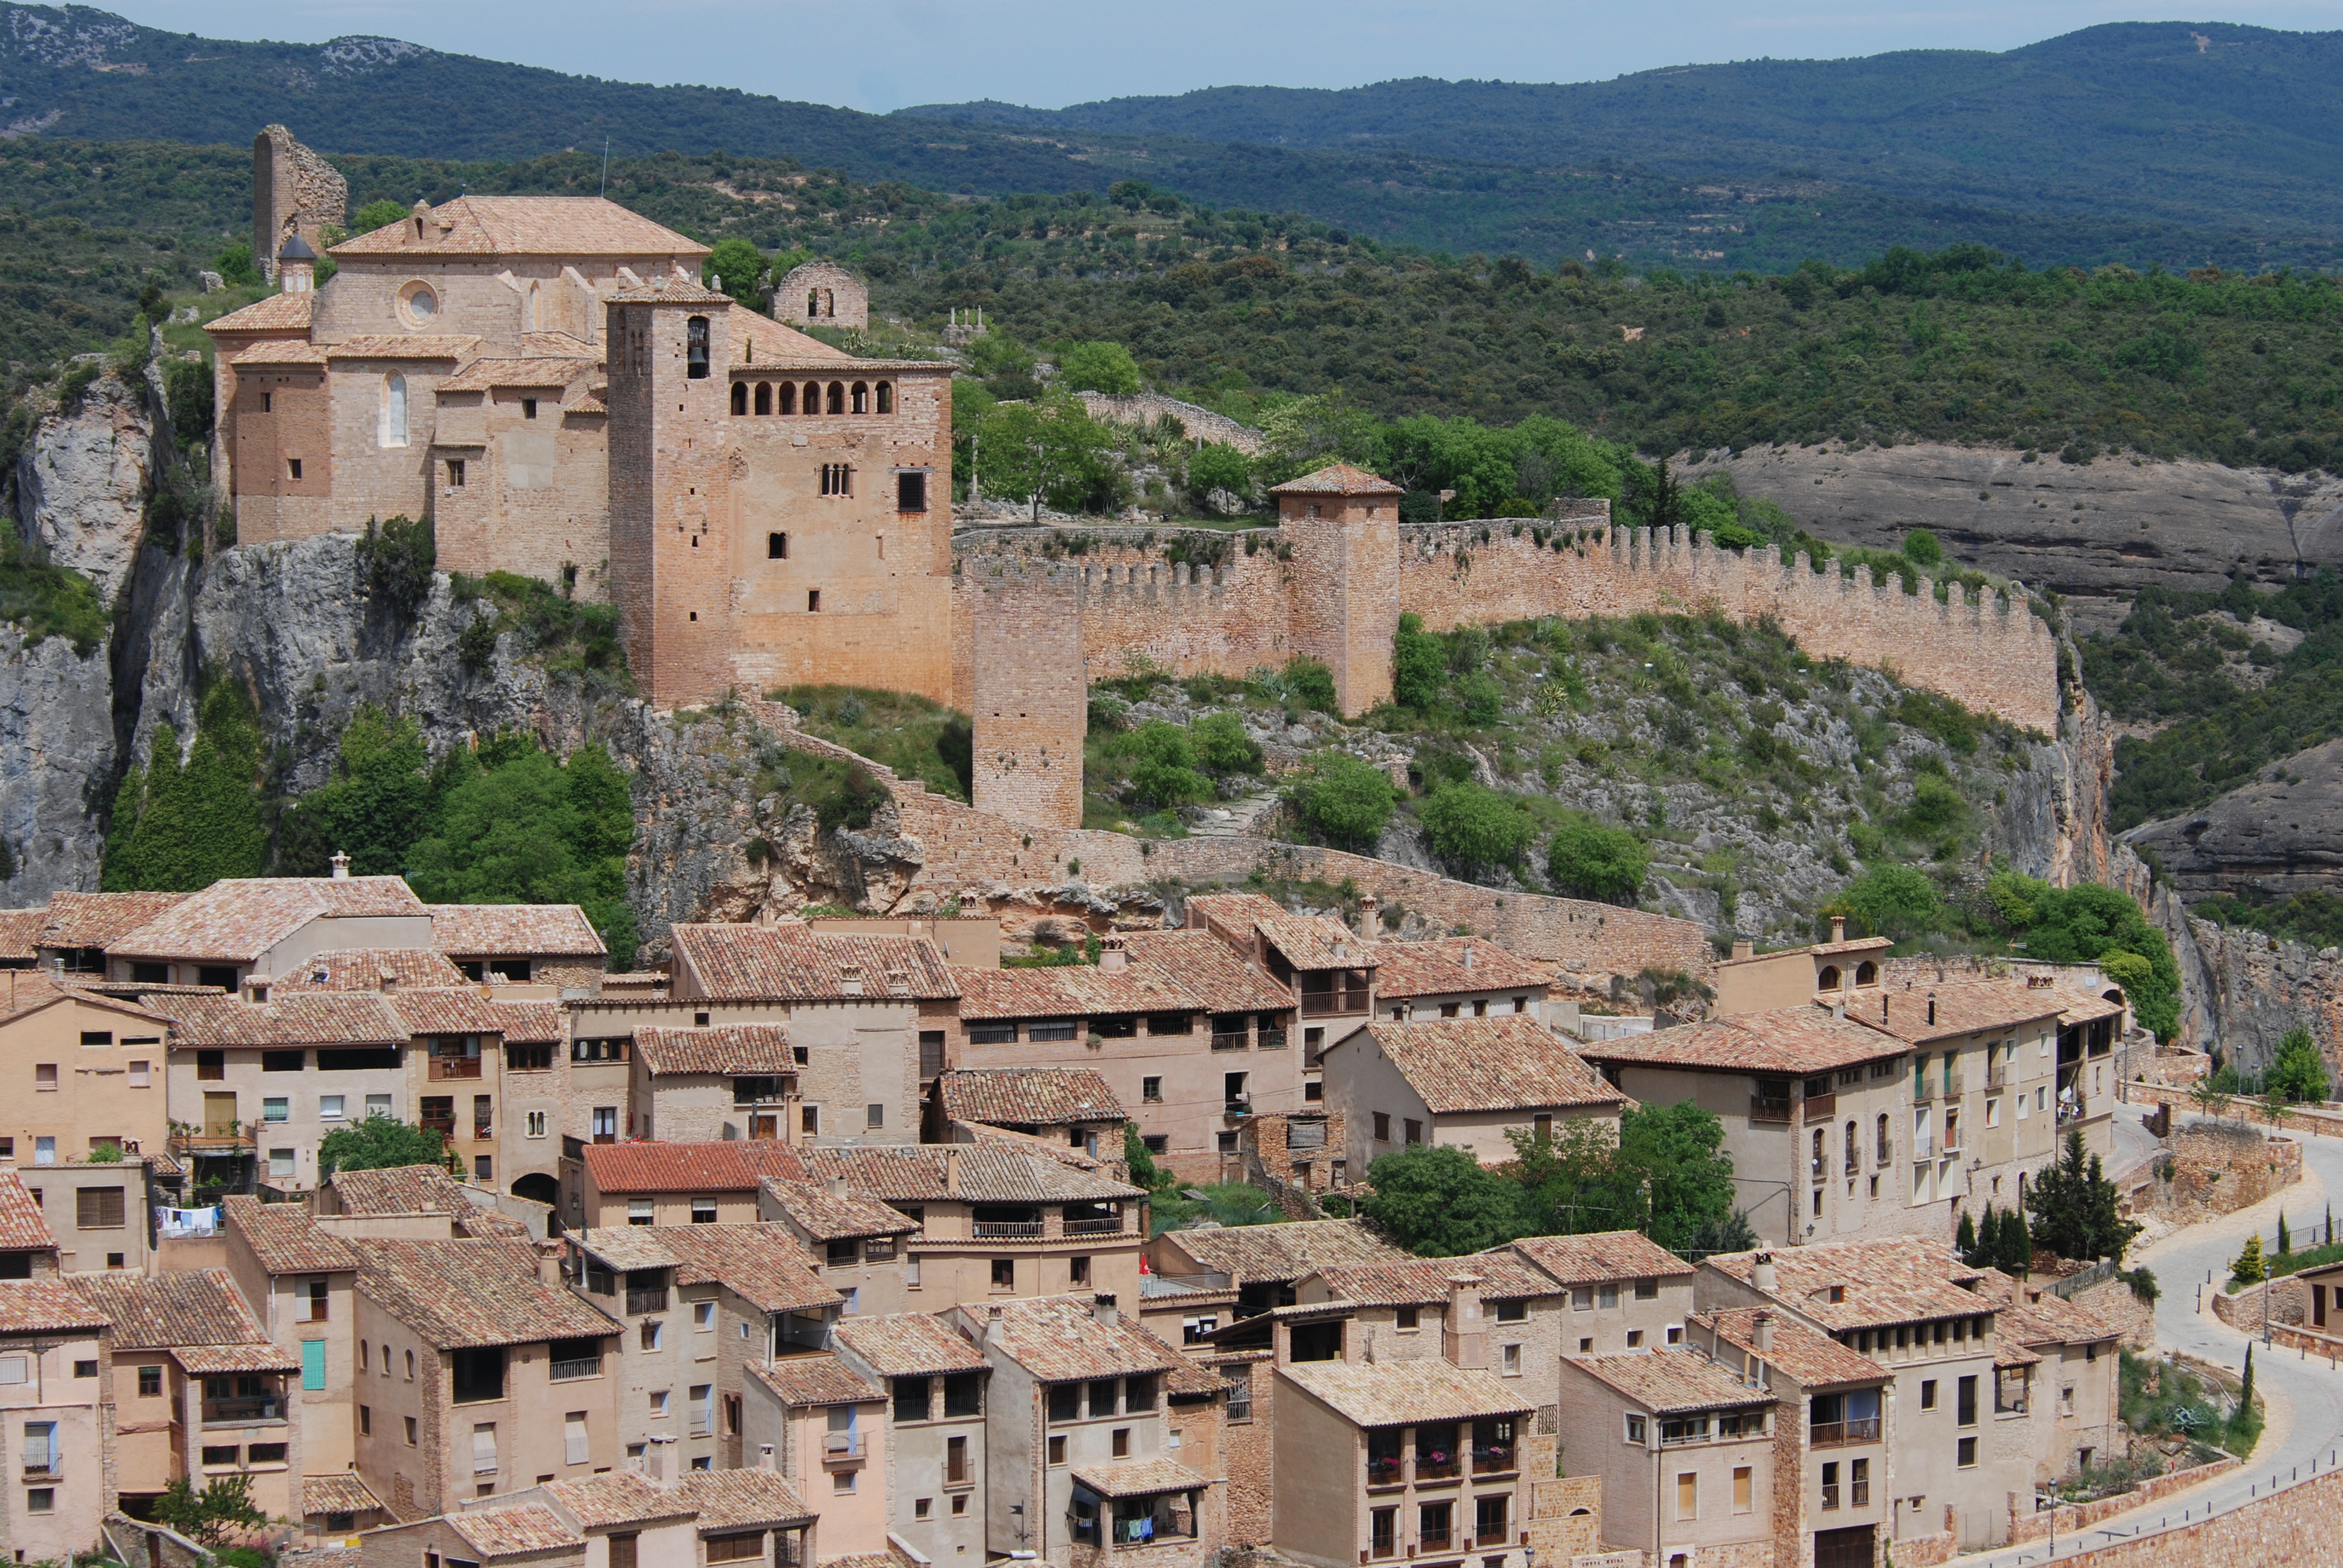 Click picture to see more of Alquezar.